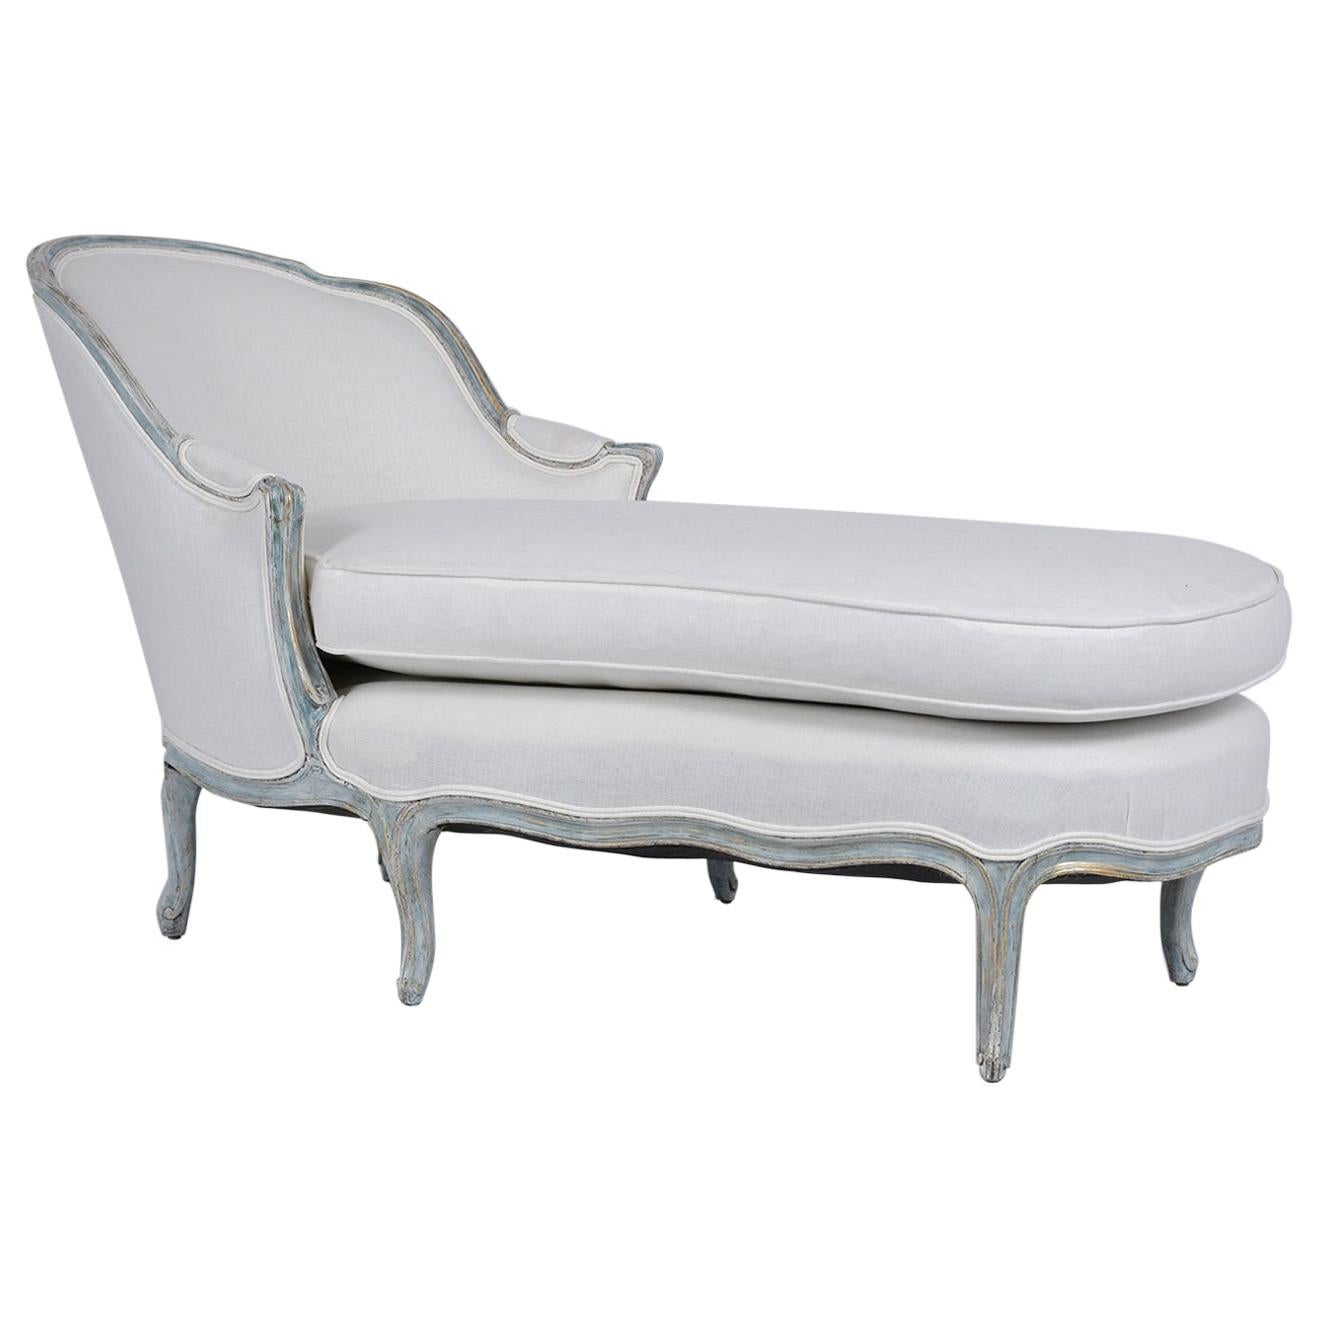 French Provincial Gilt Painted Chaise Lounge